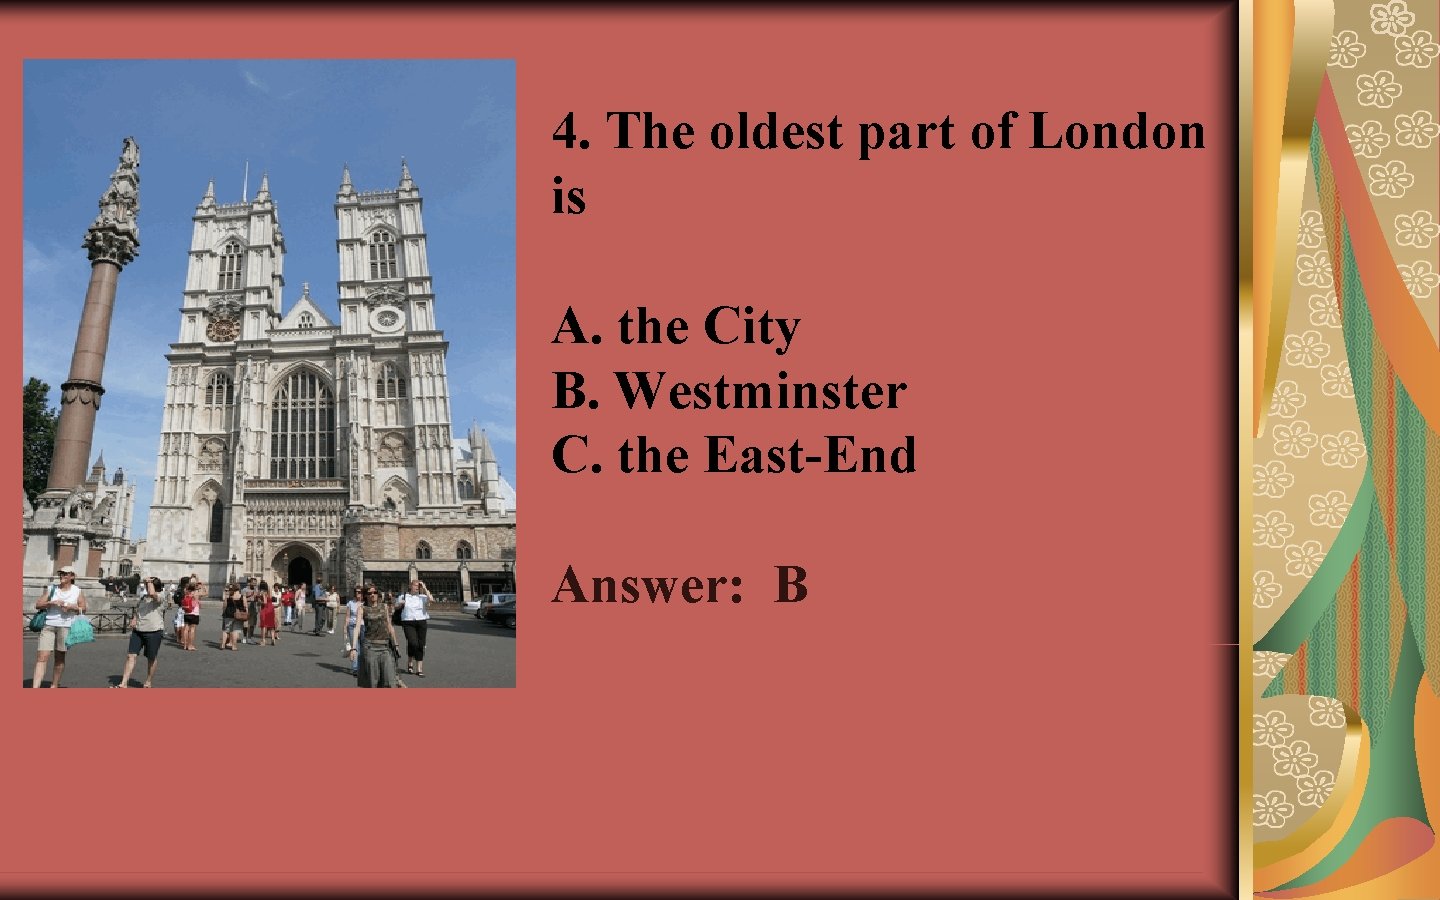 4. The oldest part of London is A. the City B. Westminster C. the